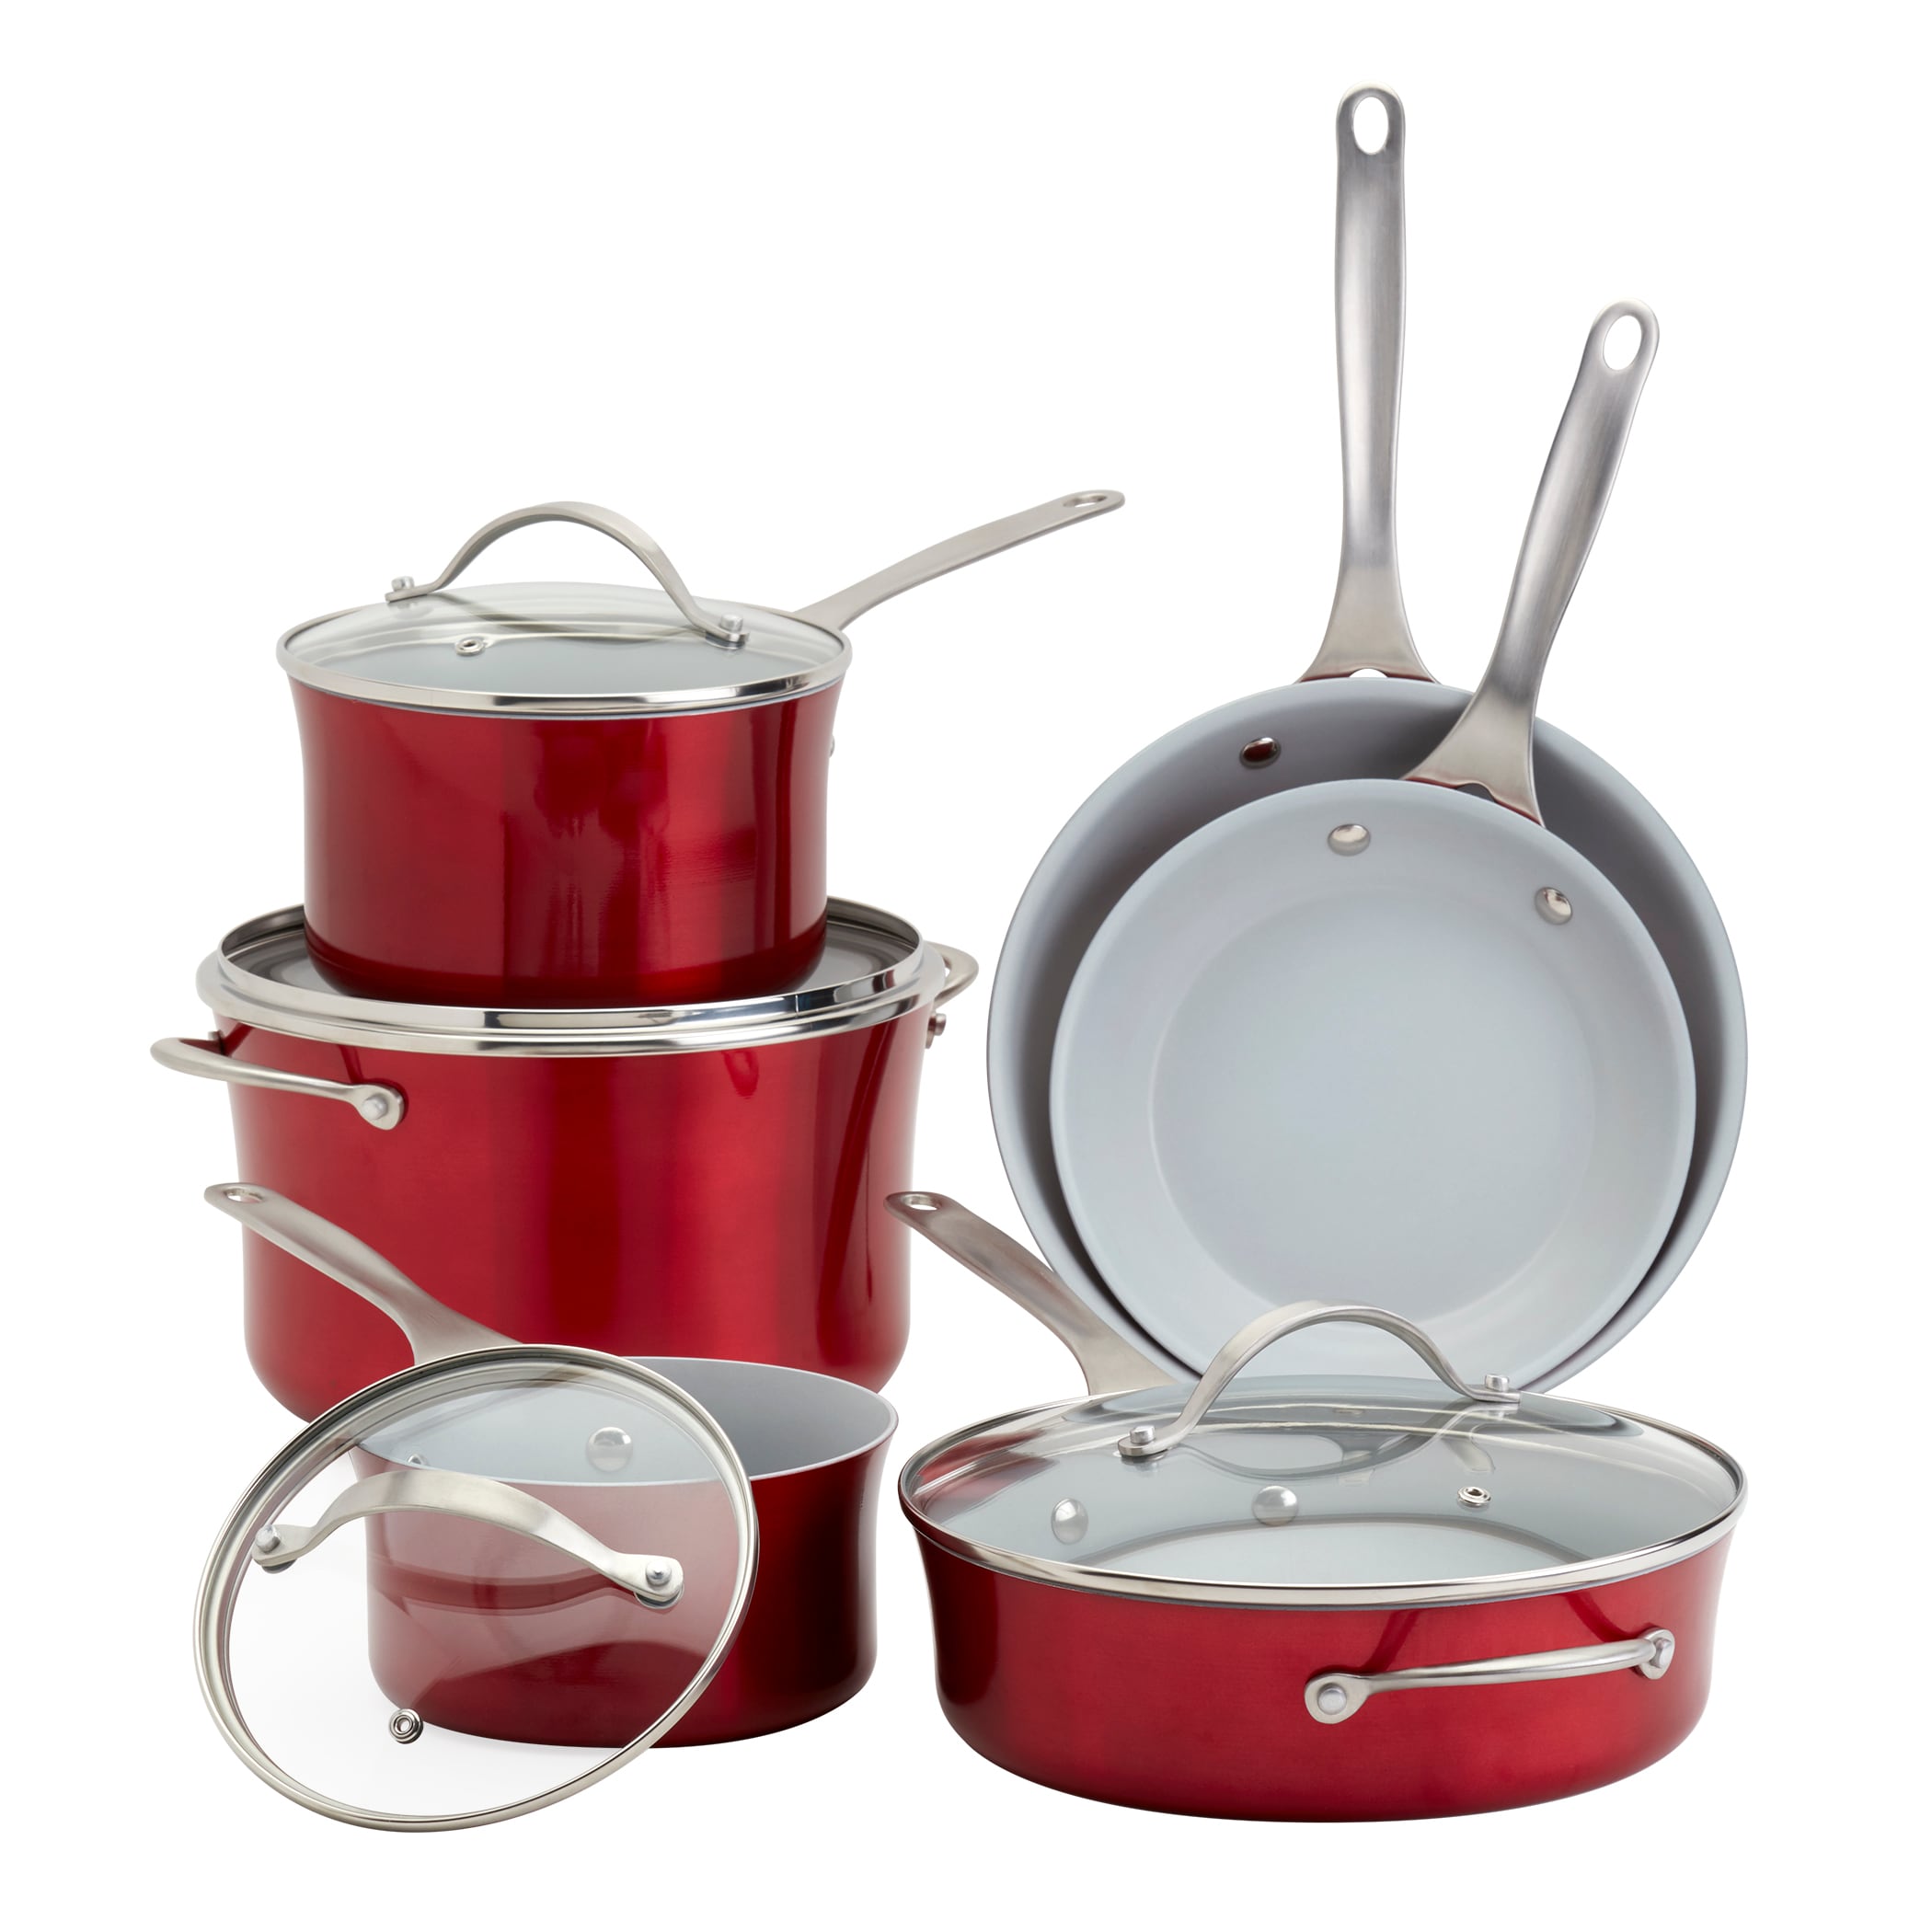 GreenLife 12-Piece Classic Pro 6-in Aluminum Cookware Set with Lid